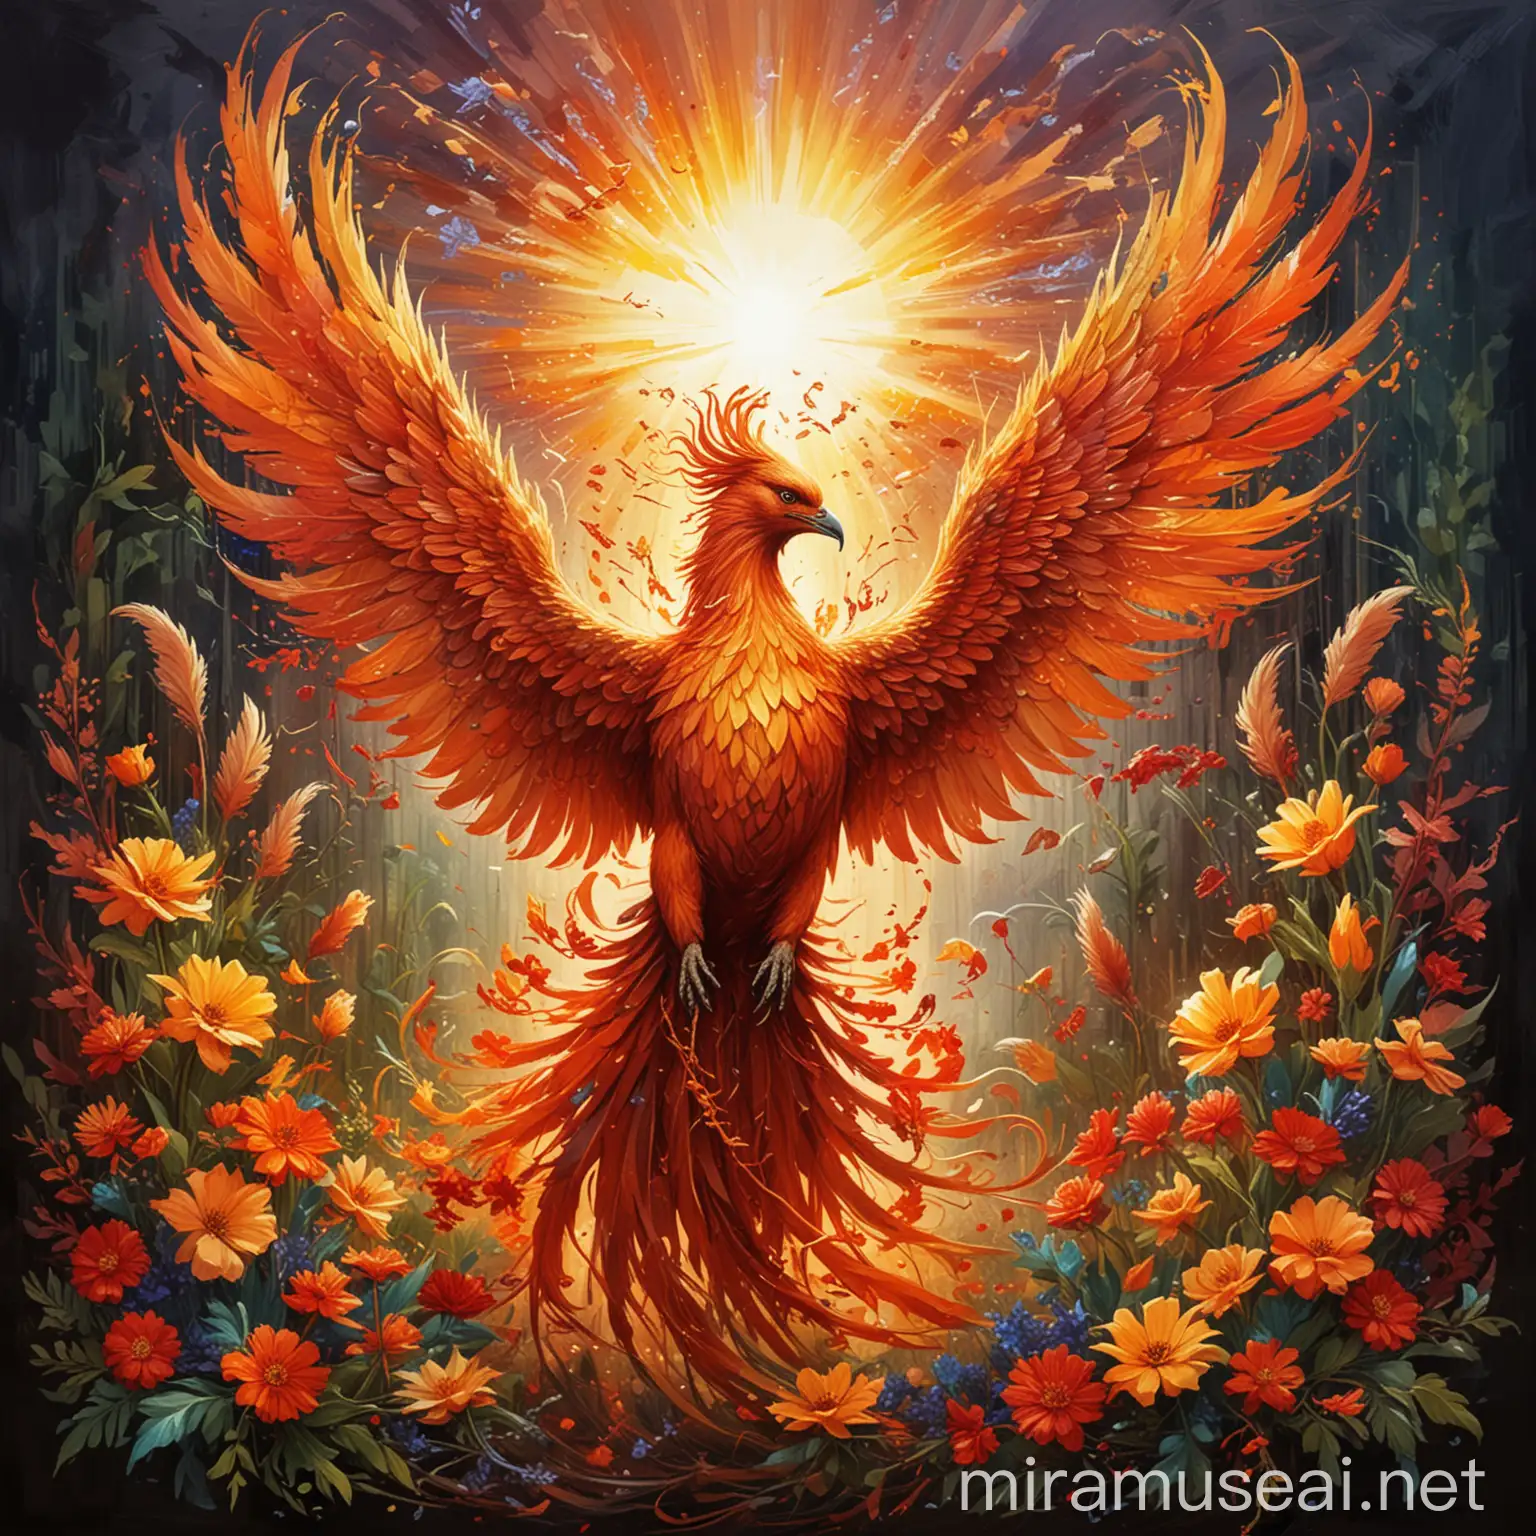 Triumphant Phoenix Rising from Ashes Symbol of Transformation and Hope